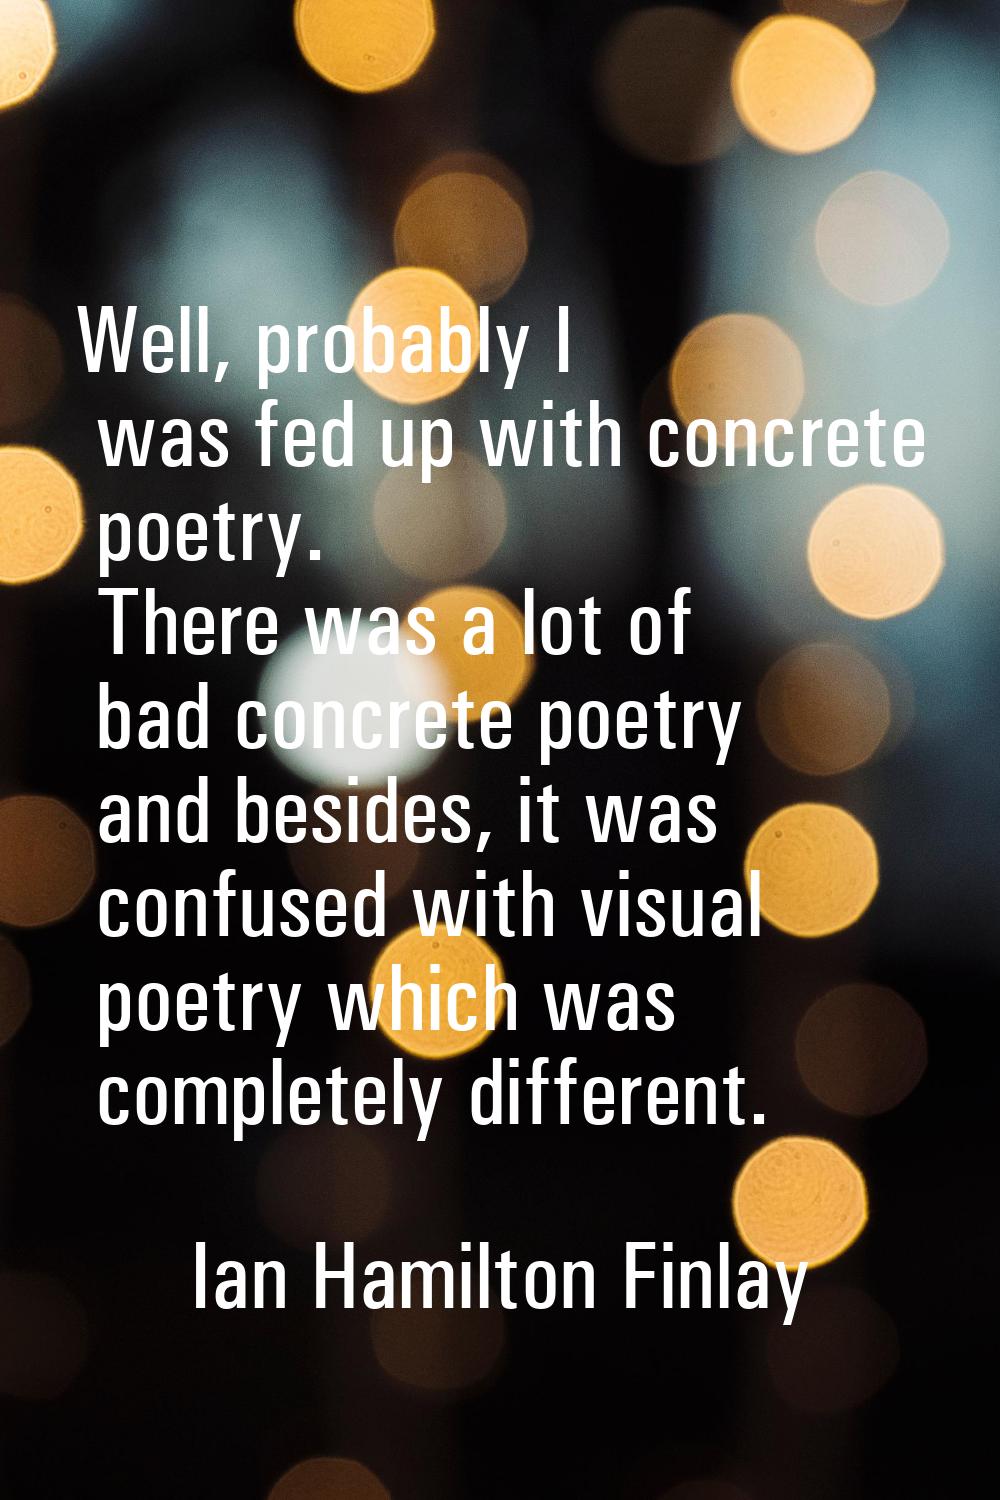 Well, probably I was fed up with concrete poetry. There was a lot of bad concrete poetry and beside